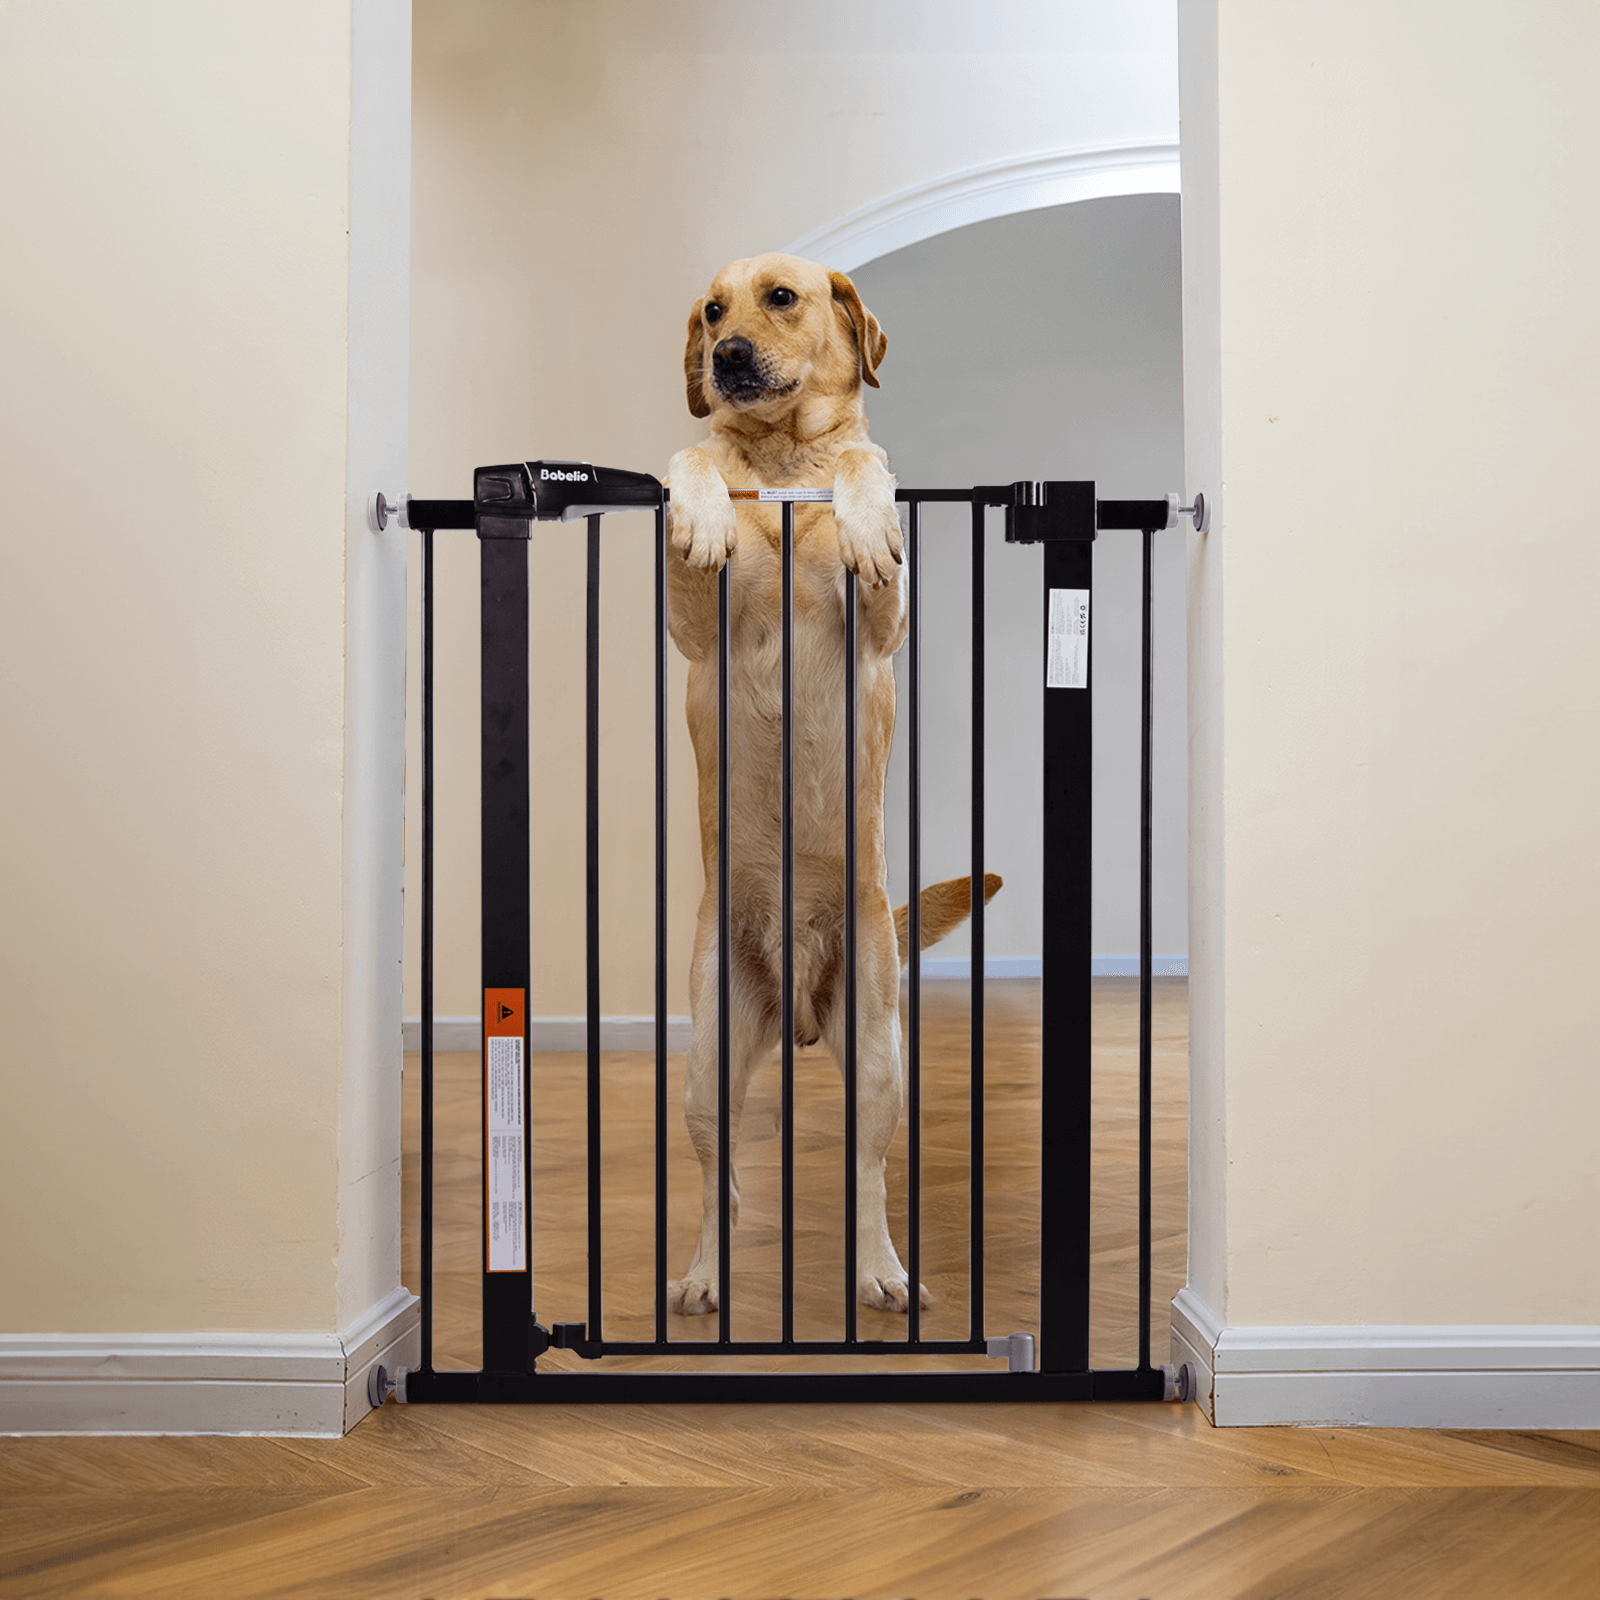 Babelio 36" High Metal Safety Gate for Babies & Pets (26-40" Wide, Black)